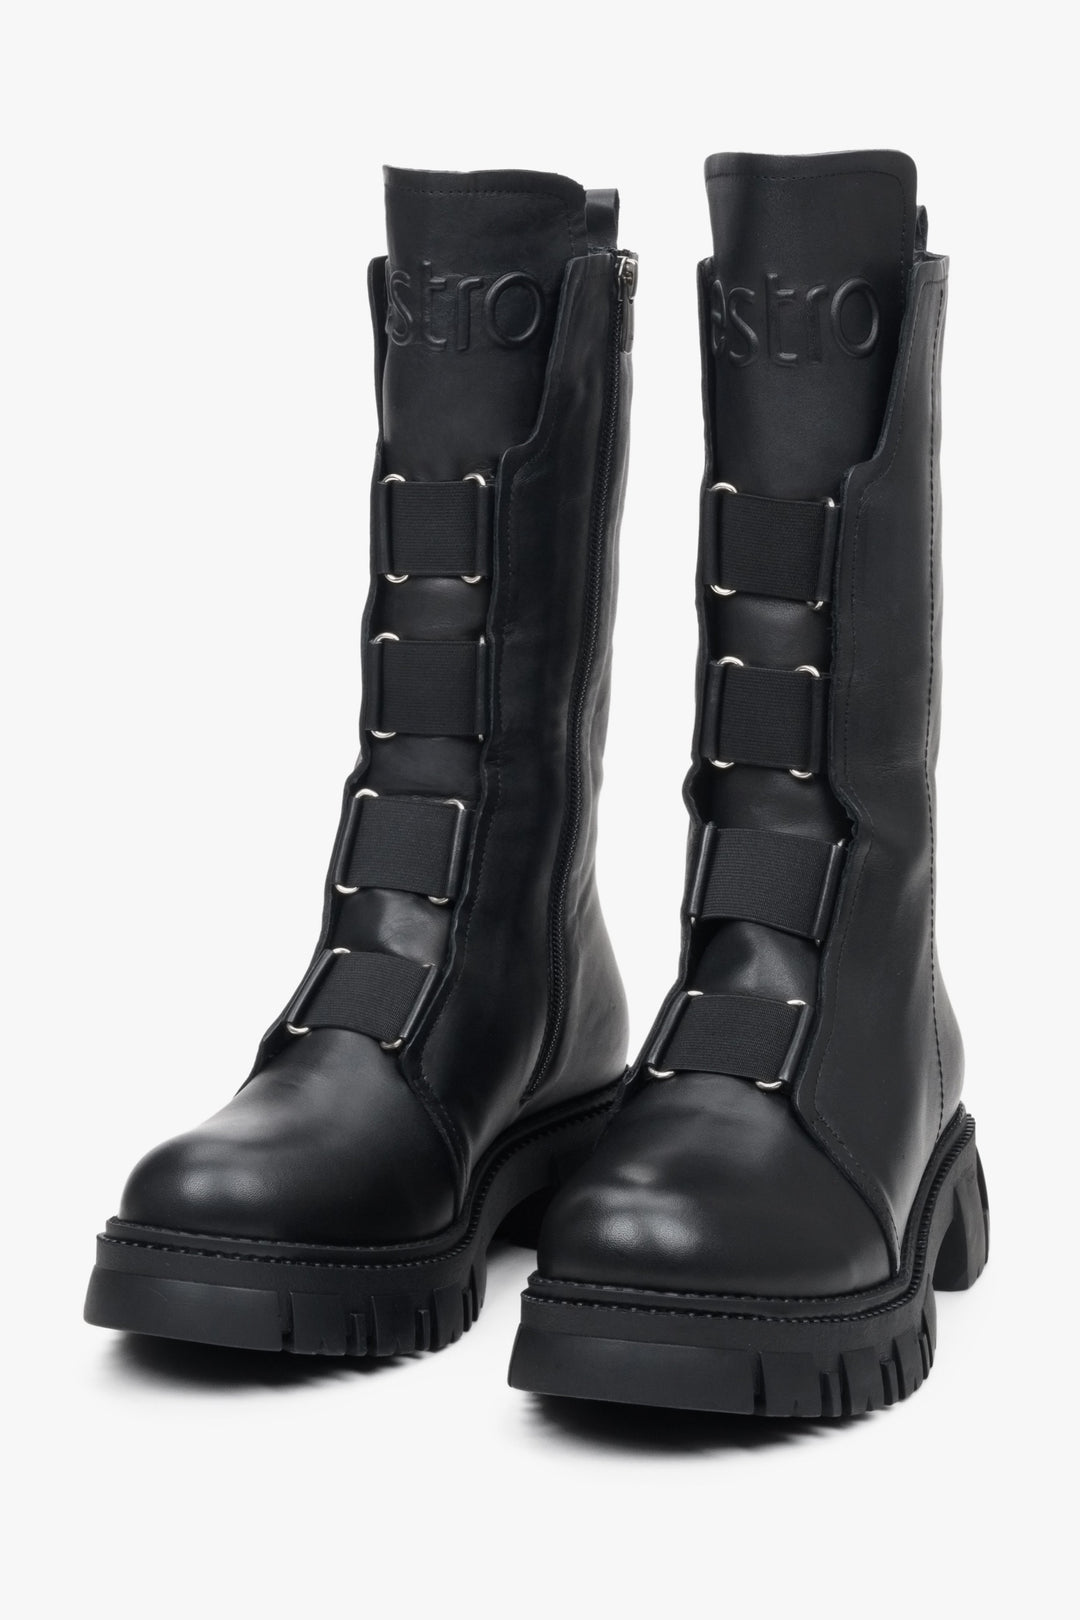 High black women's leather boots with an elastic insert by Estro.